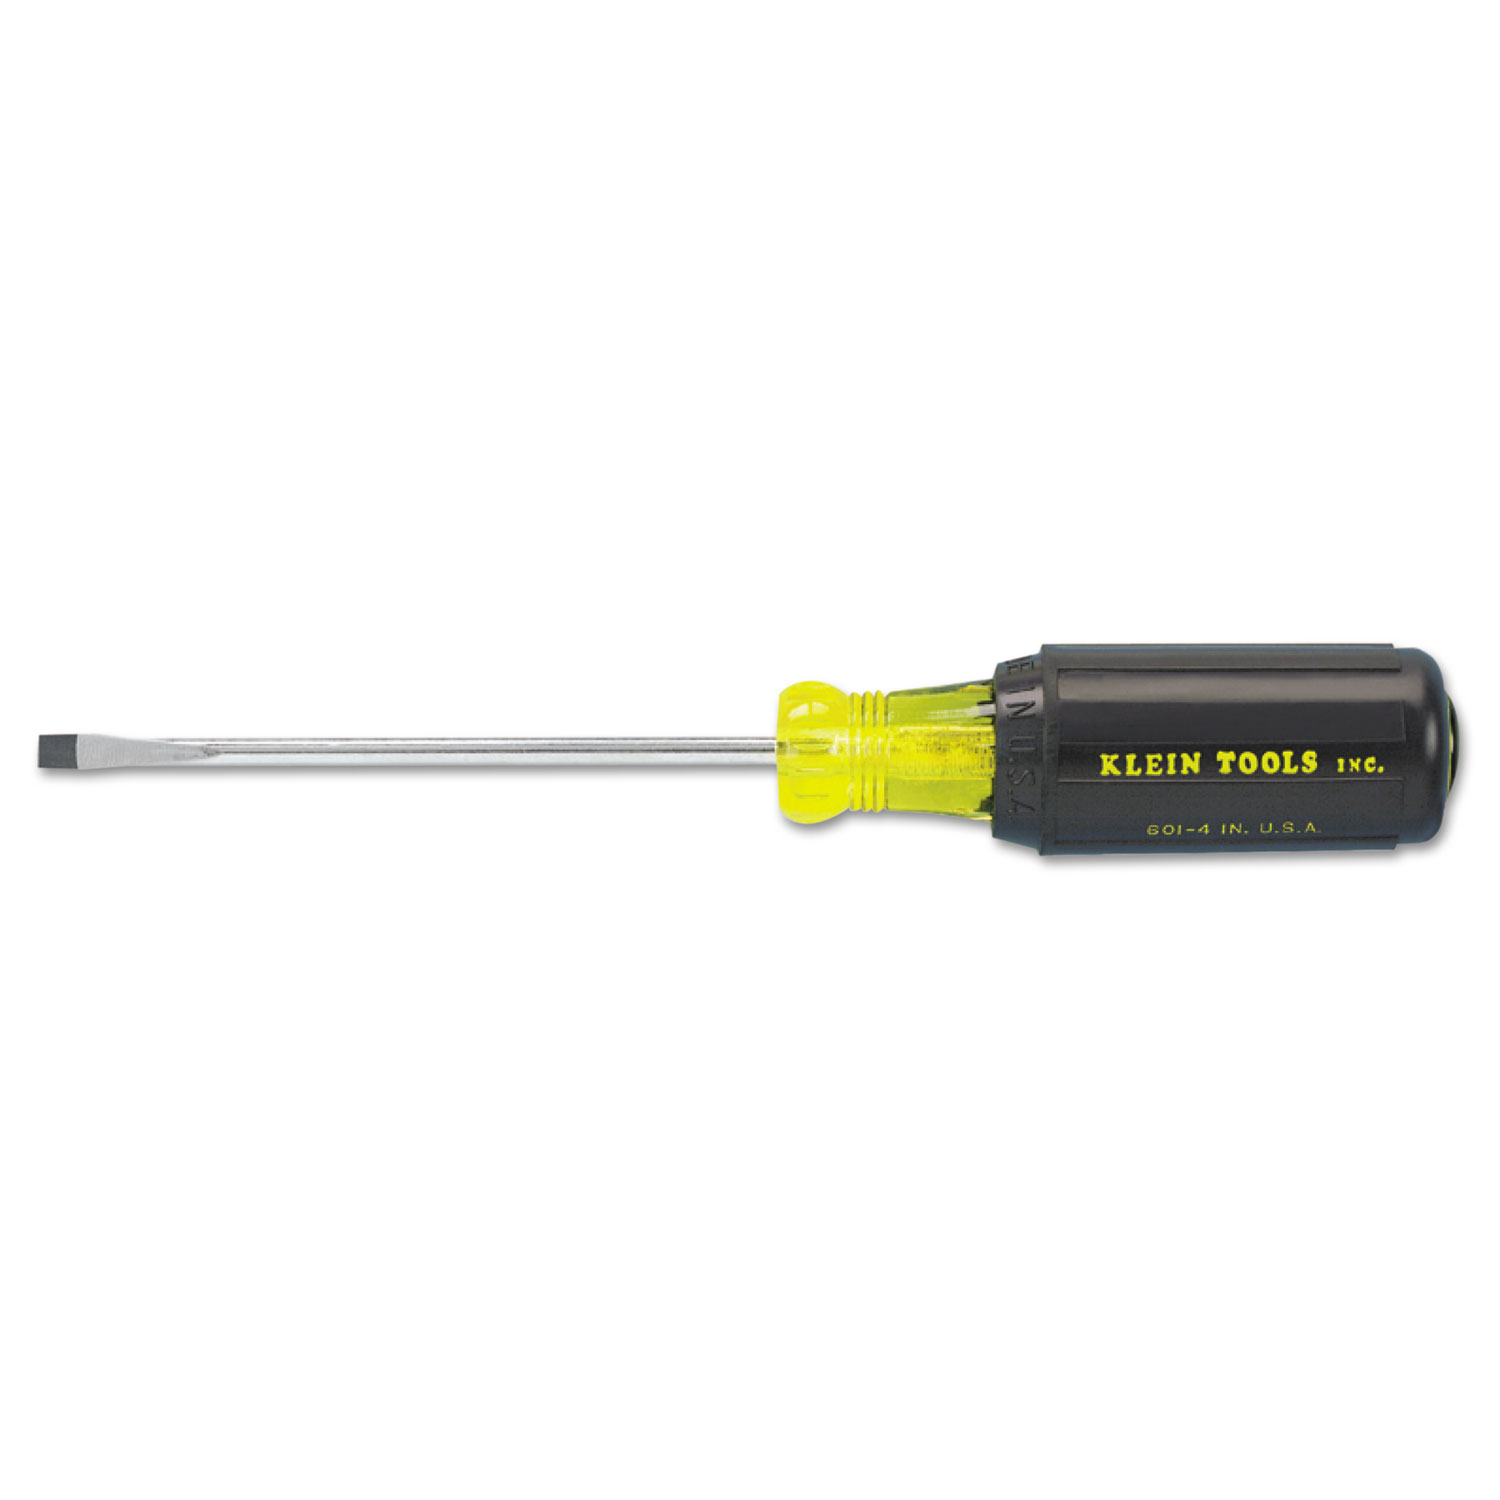 Slotted Cabinet-Tip Cushioned Grip Screwdriver, 3 Long, Round Shaft